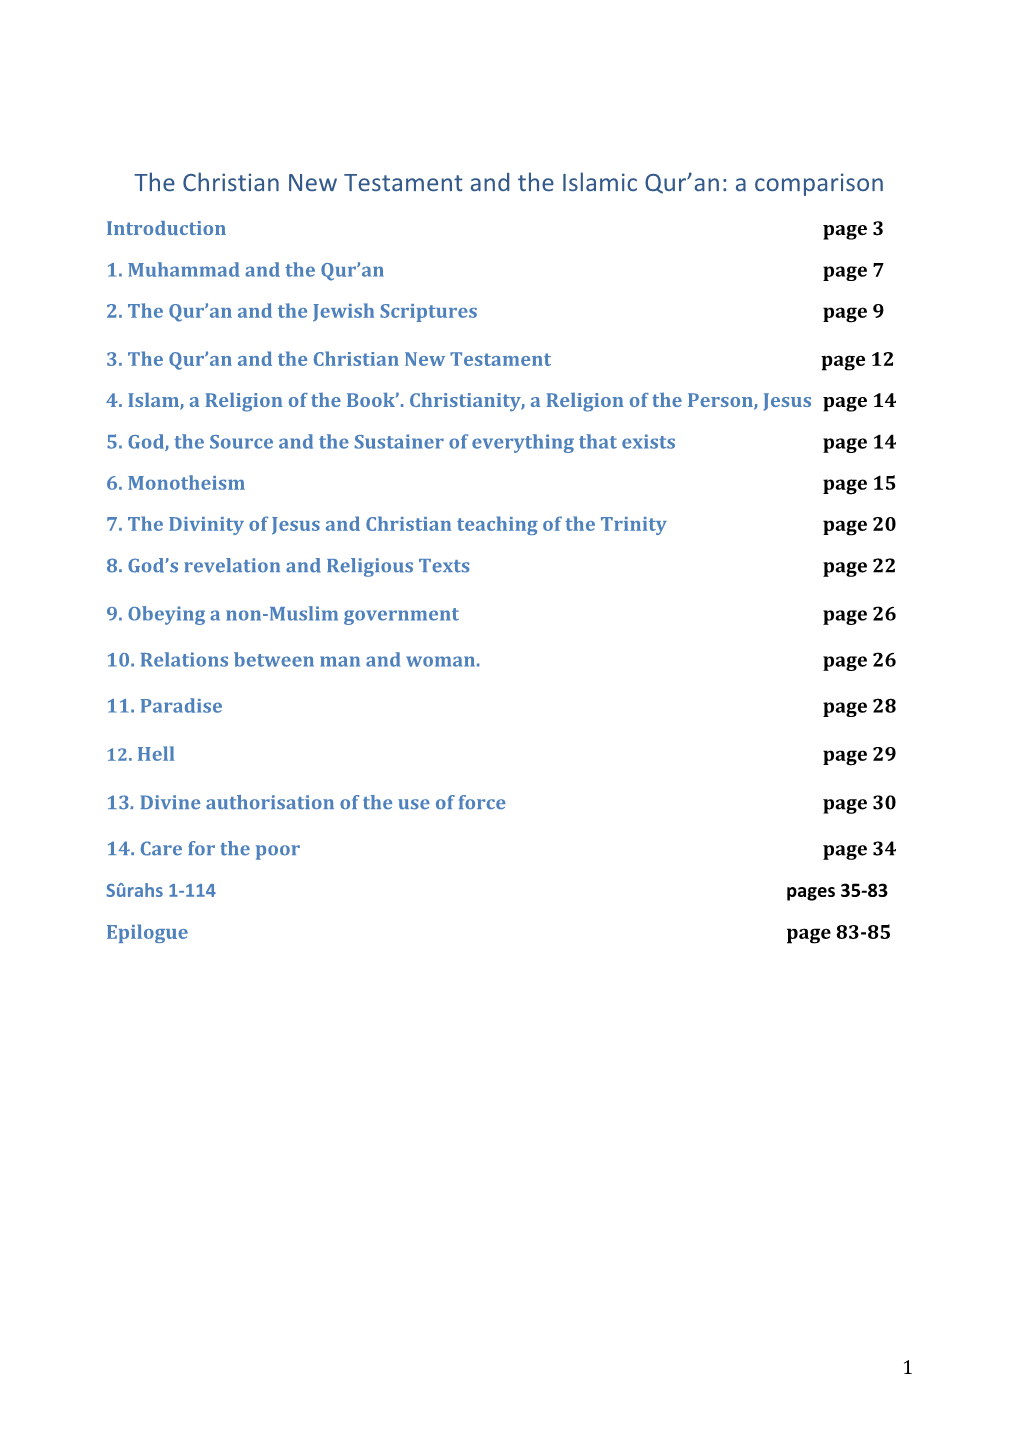 The Christian New Testament and the Islamic Qur'an